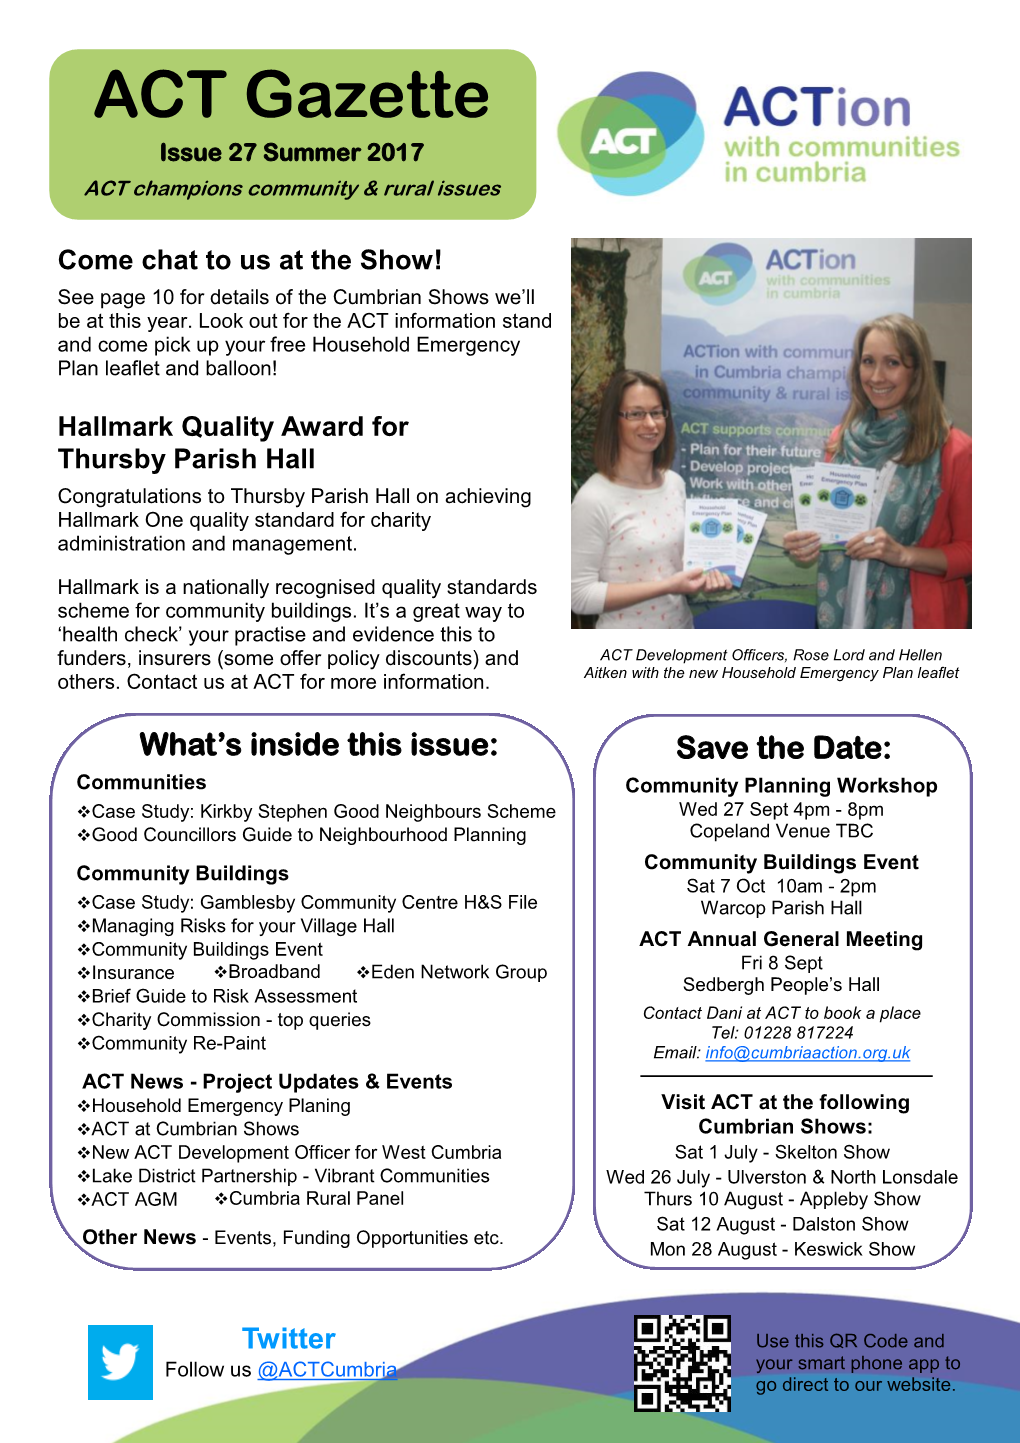 ACT Gazette Issue 27 Summer 2017 ACT Champions Community & Rural Issues